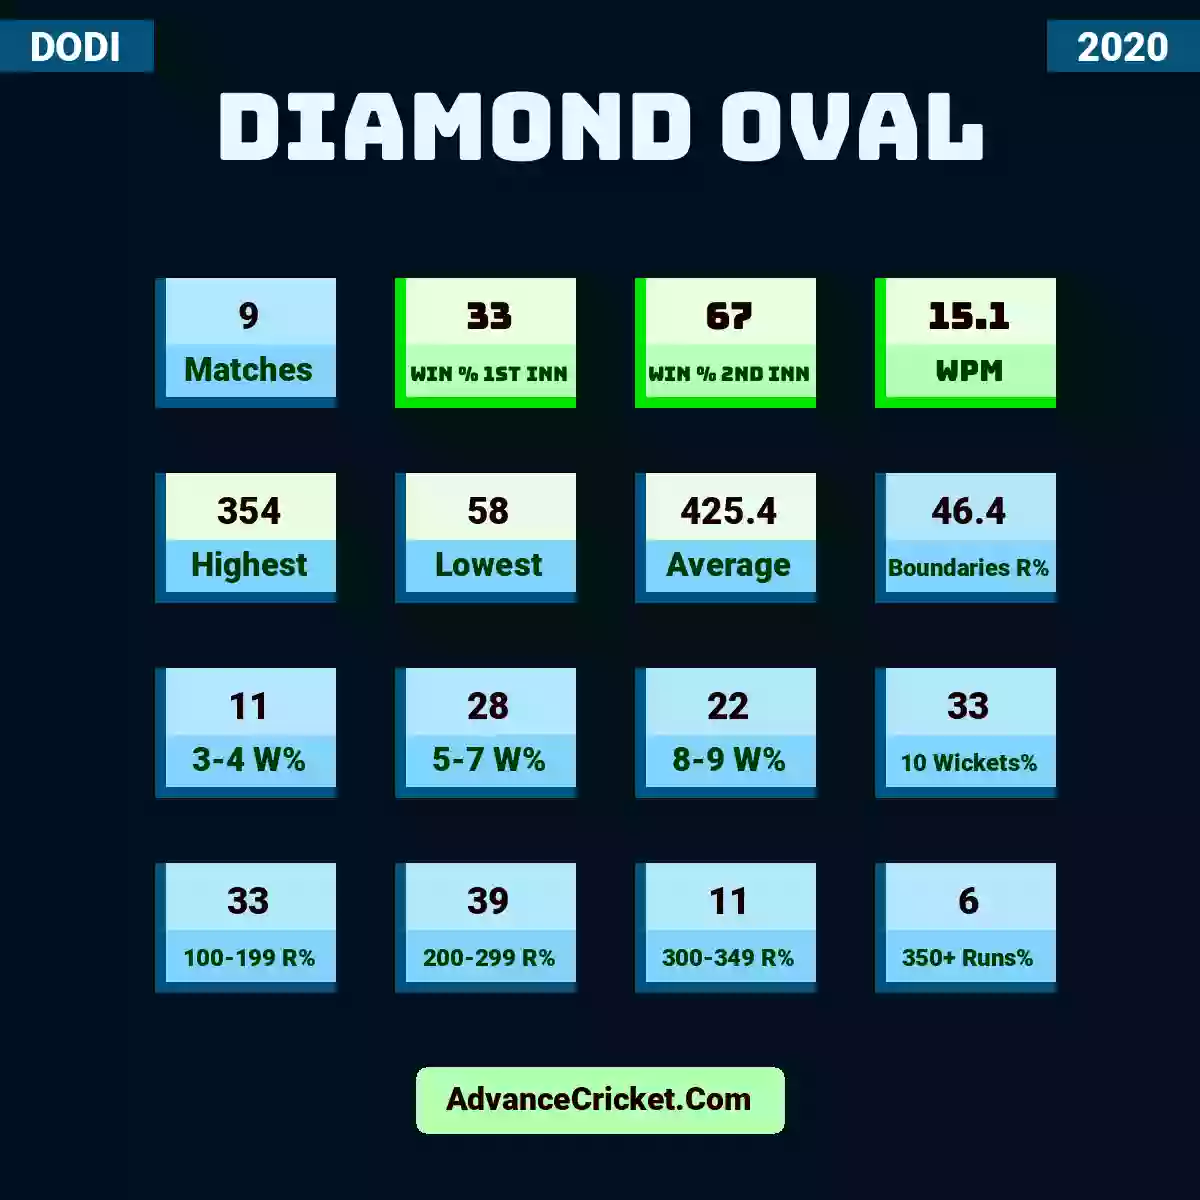 Image showing Diamond Oval with Matches: 9, Win % 1st Inn: 33, Win % 2nd Inn: 67, WPM: 15.1, Highest: 354, Lowest: 58, Average: 425.4, Boundaries R%: 46.4, 3-4 W%: 11, 5-7 W%: 28, 8-9 W%: 22, 10 Wickets%: 33, 100-199 R%: 33, 200-299 R%: 39, 300-349 R%: 11, 350+ Runs%: 6.